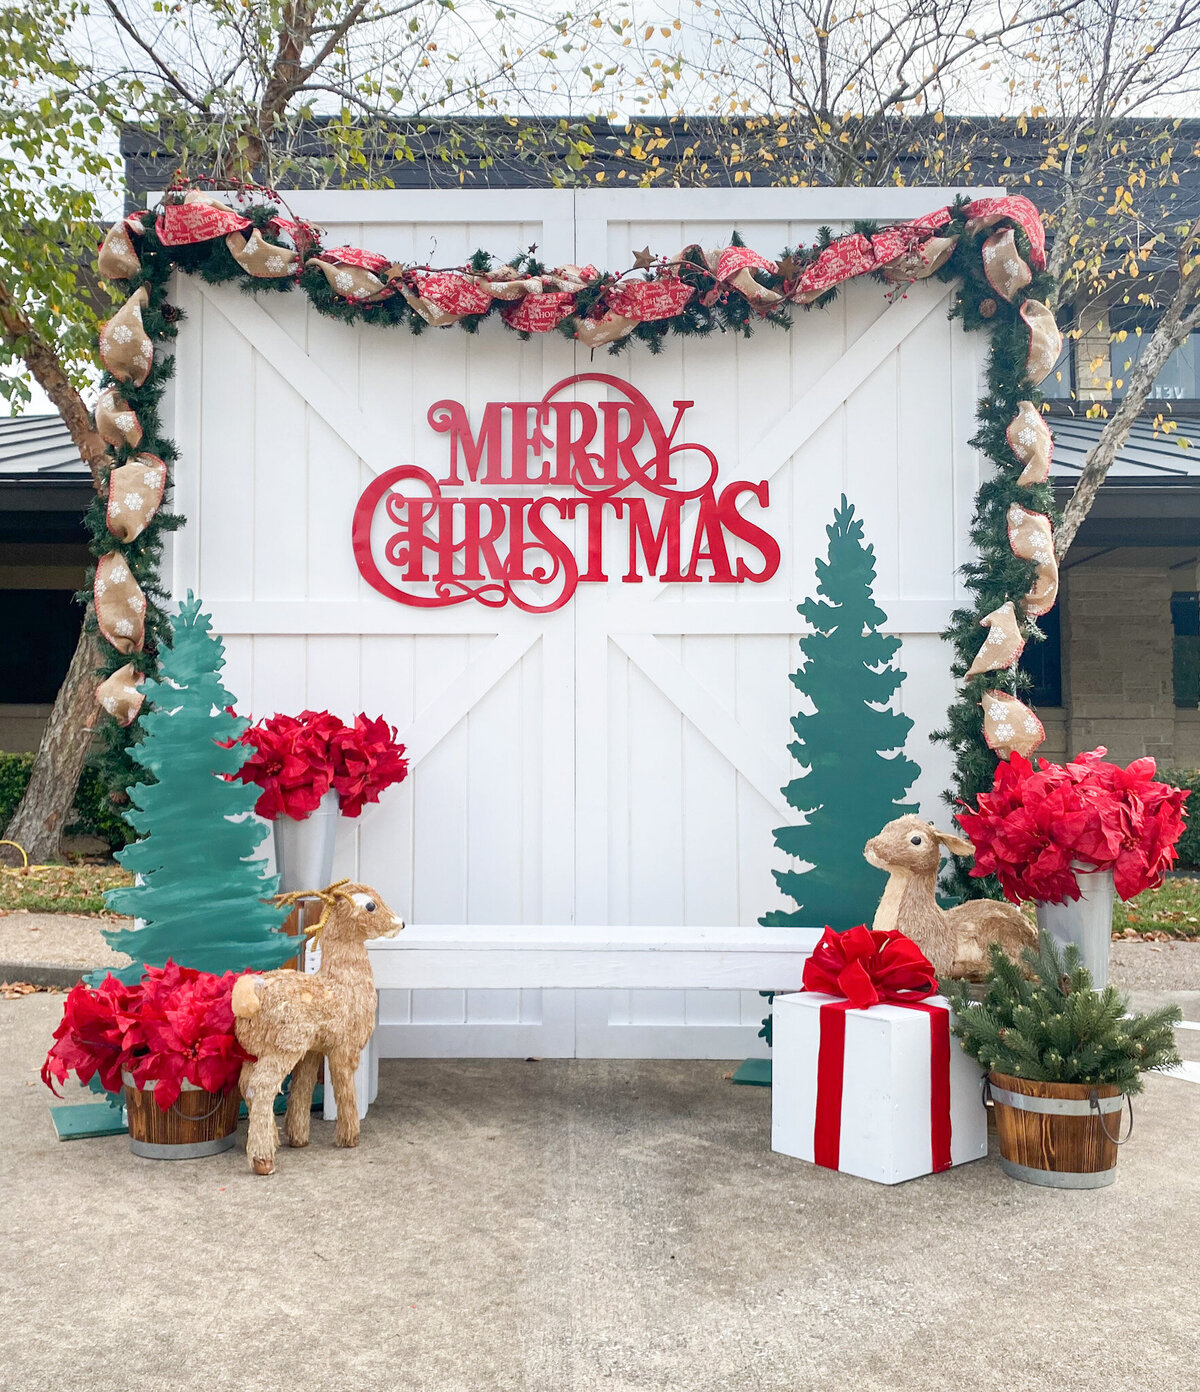 Festive Merry Christmas themed backdrop design with trees, garland, presents and red floral arrangements